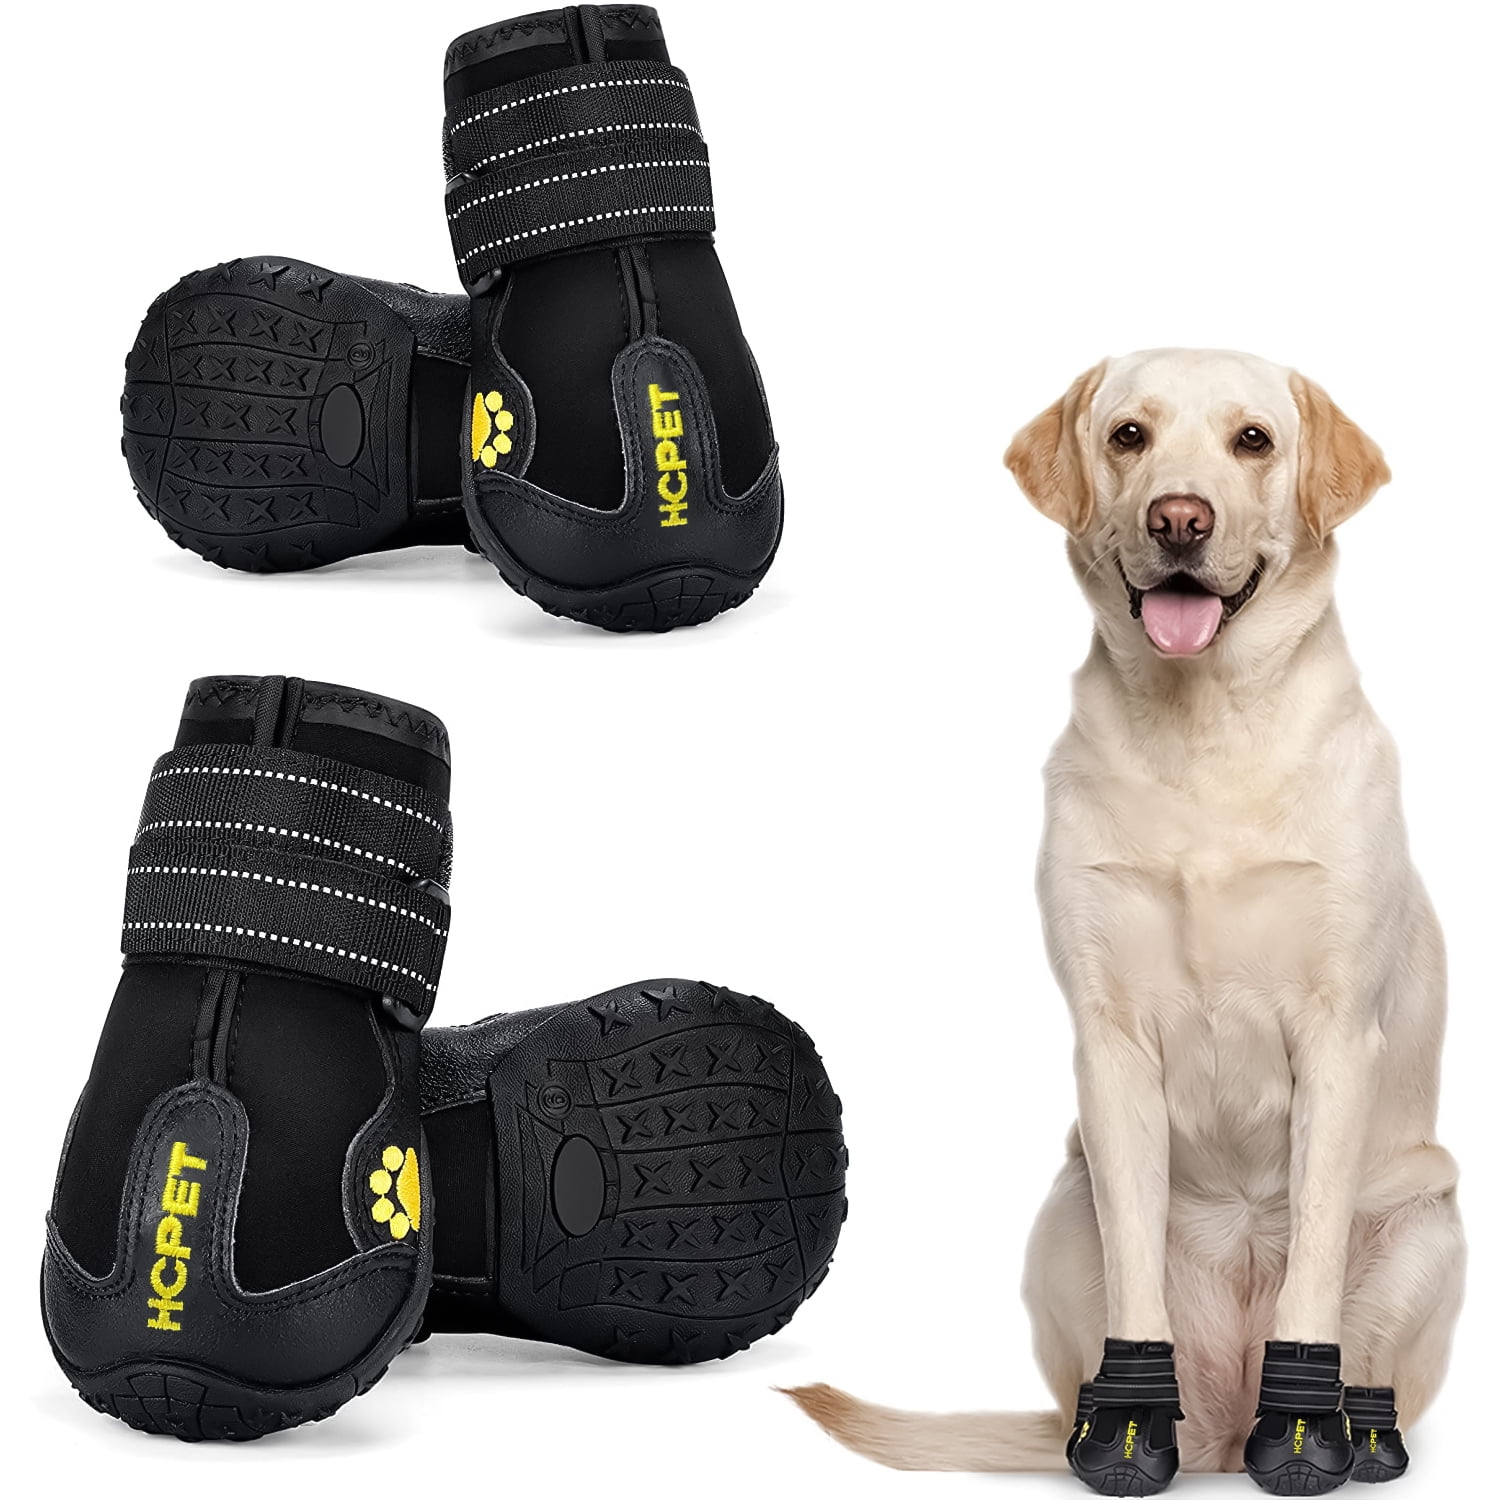 Waterproof Shoes for Dog,Dog Booties with Reflective Rugged Anti-Slip Sole,Outdoor Dog Boots,Dog Boots for Medium to Large Dogs,Rain Boots for Dog 4pcs Dog Boots 